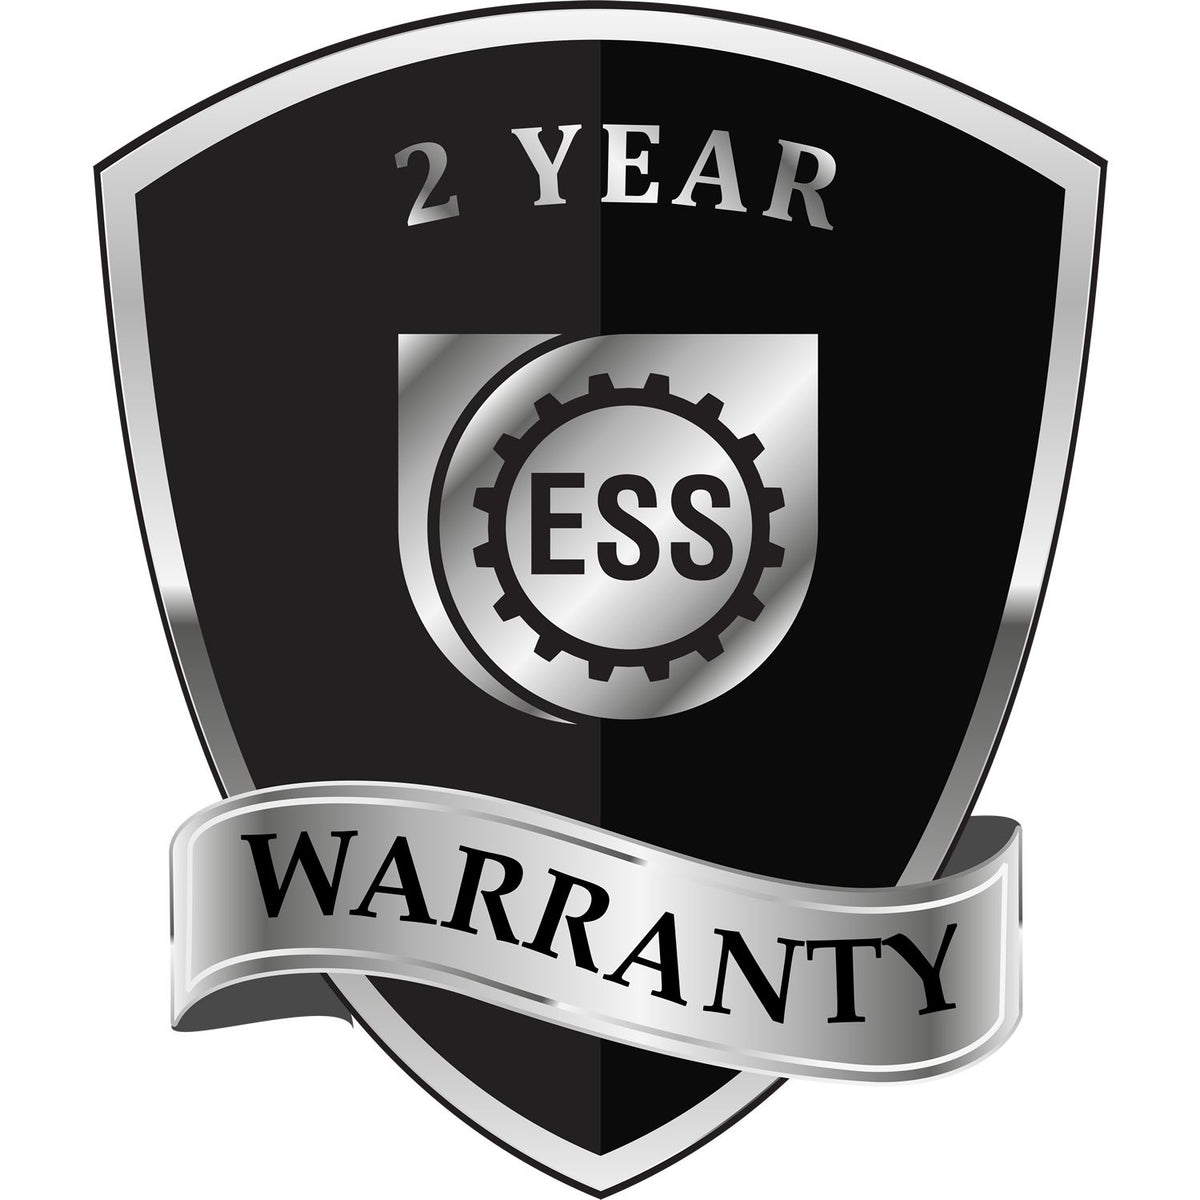 A badge or emblem showing a warranty icon for the Soft Pocket Kentucky Landscape Architect Embosser